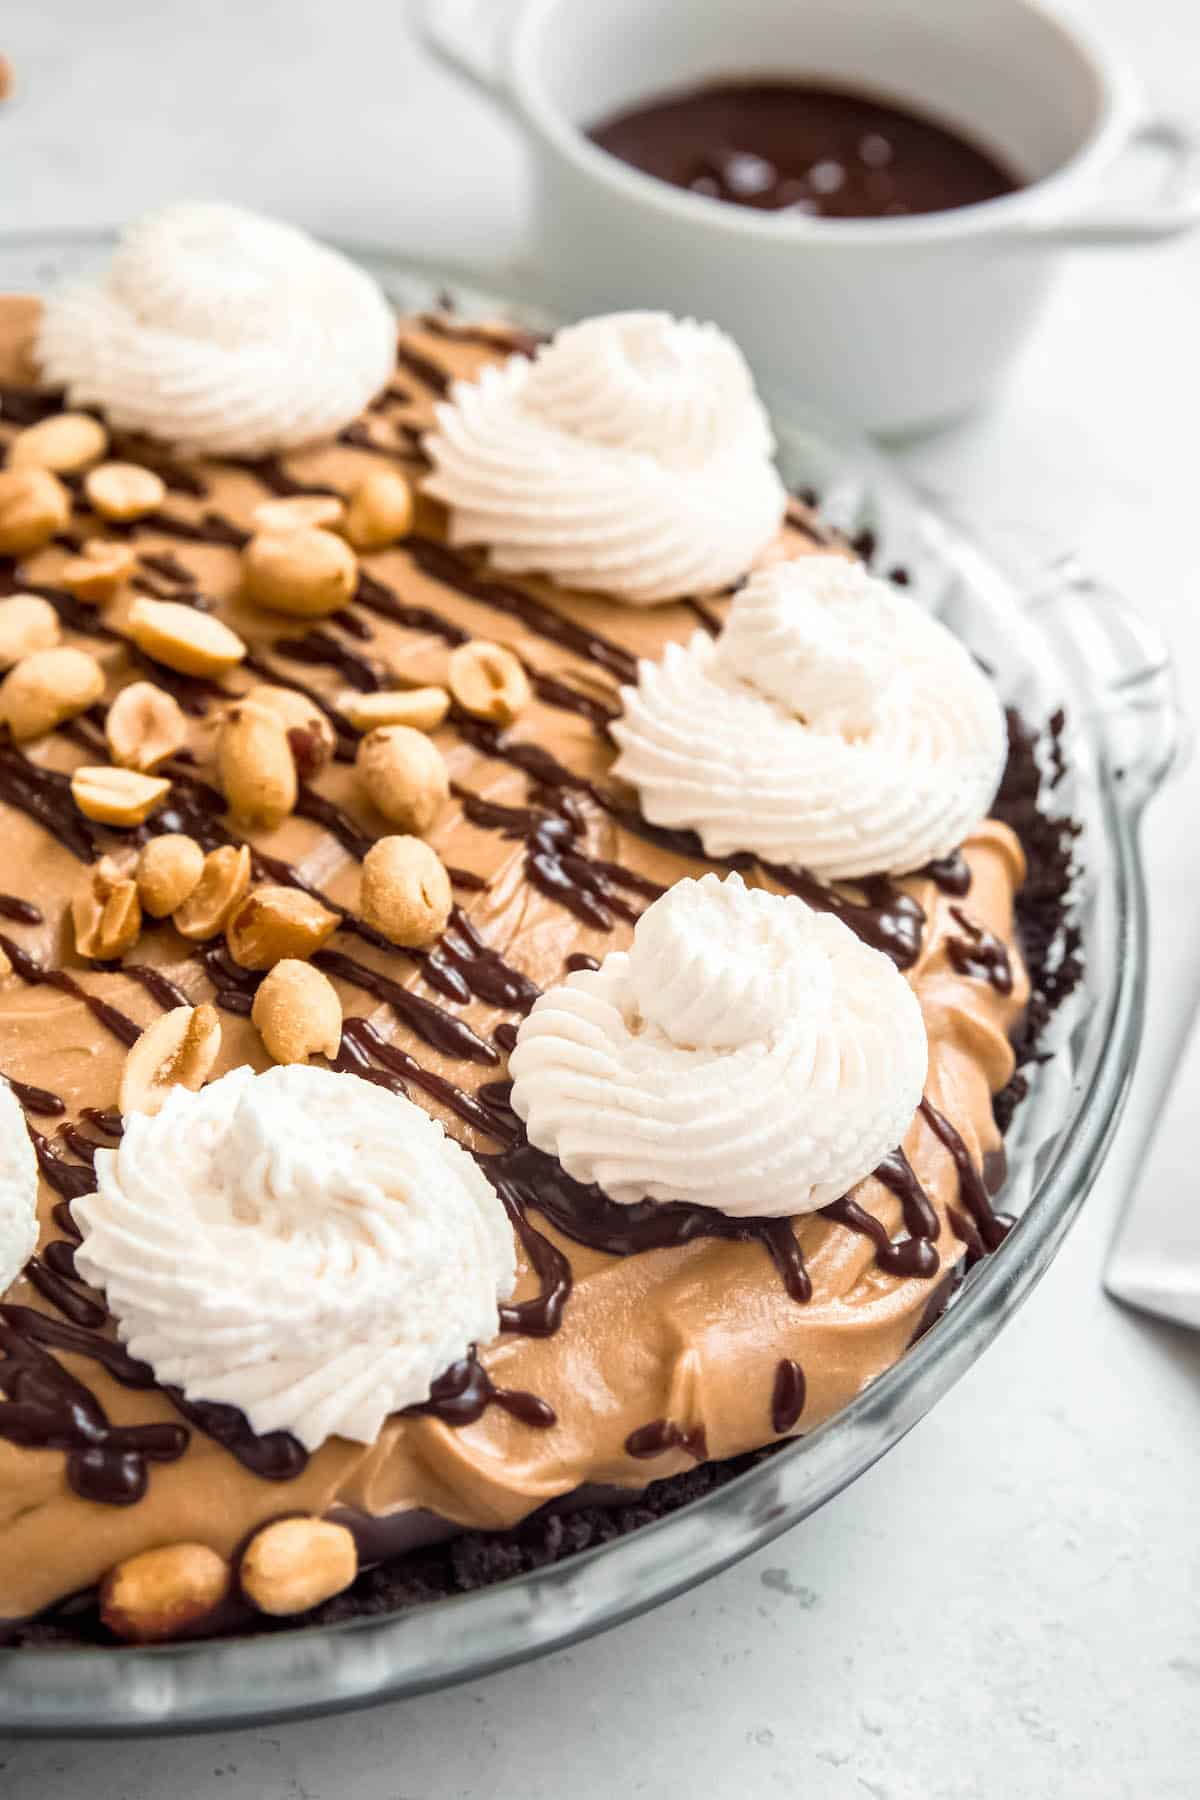 45 degree angle shot of peanut butter pie with oreo crust, chocolate peanut butter ganache, freshly whipped cream, and roasted, salted peanuts.